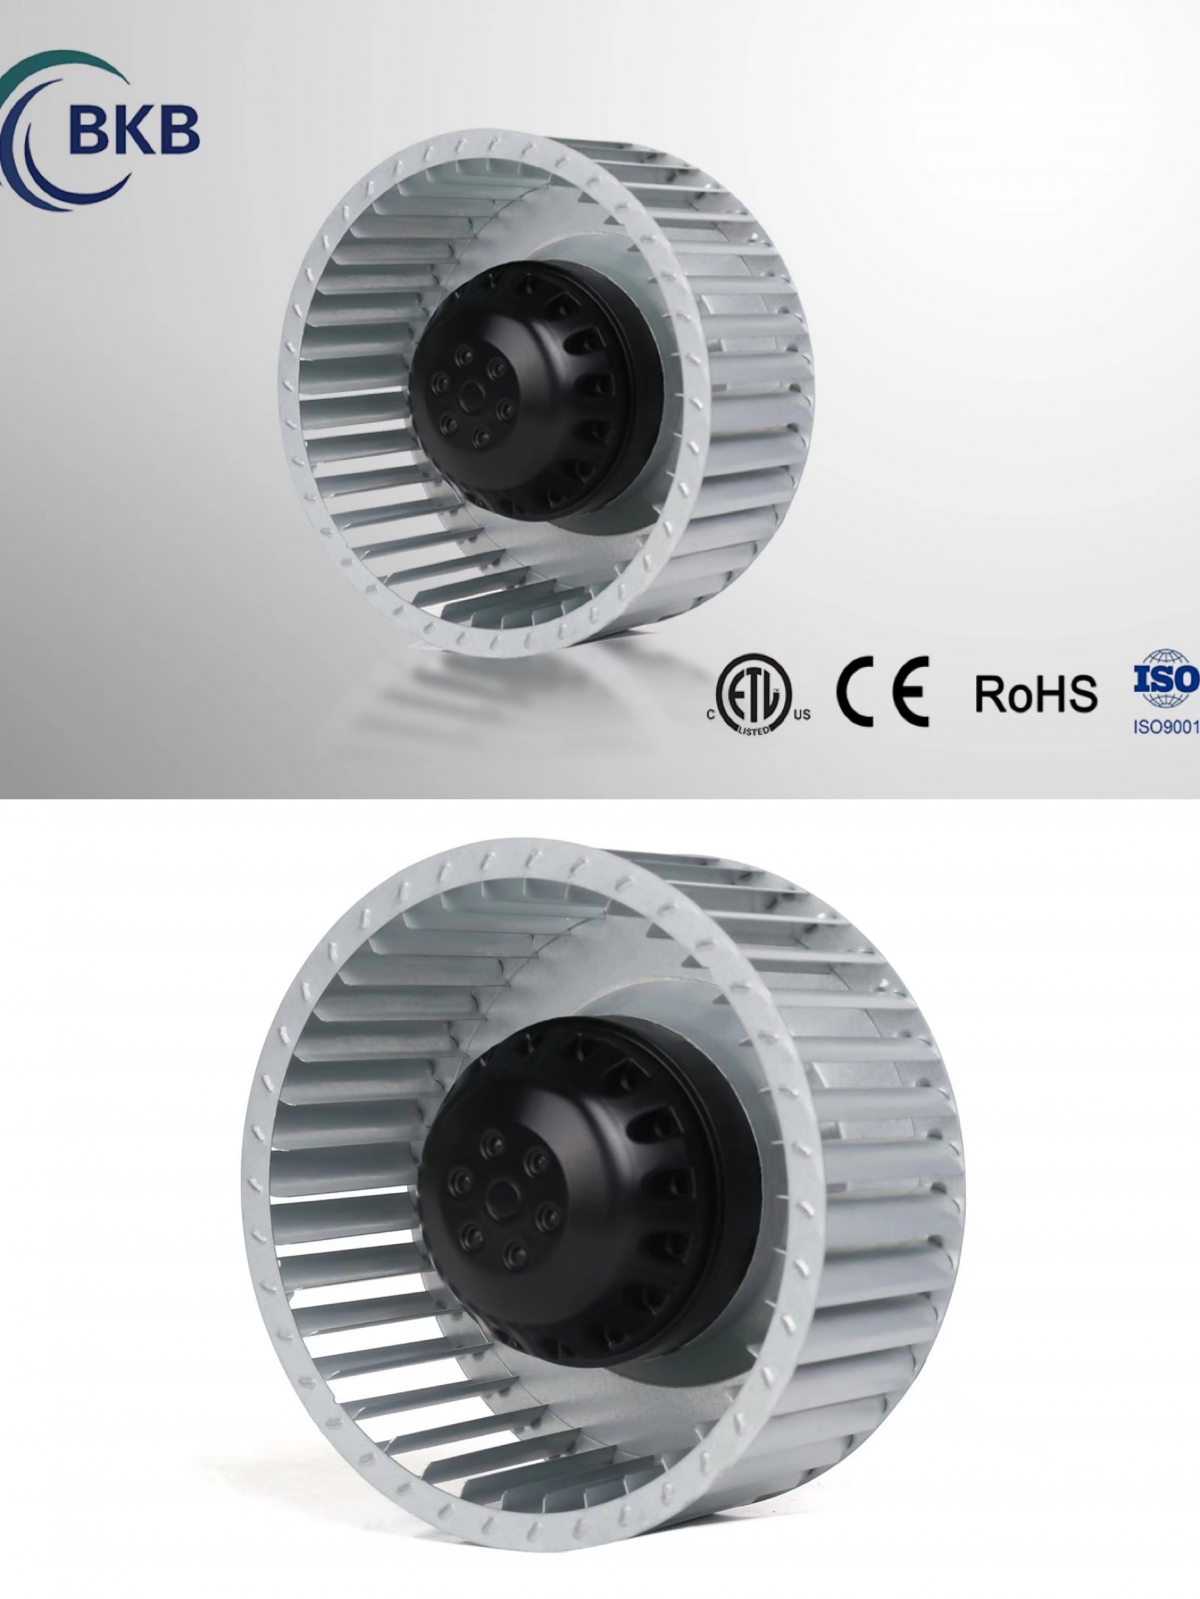 ETL LISTED Forward curved centrifugal fans SUPPLIER AND FACTORY IN CHINA . HIGH PERFORMANCE.-SUNLIGHT BLOWER,Centrifugal Fans, Inline Fans,Motors,Backward curved centrifugal fans ,Forward curved centrifugal fans ,inlet fans, EC fans